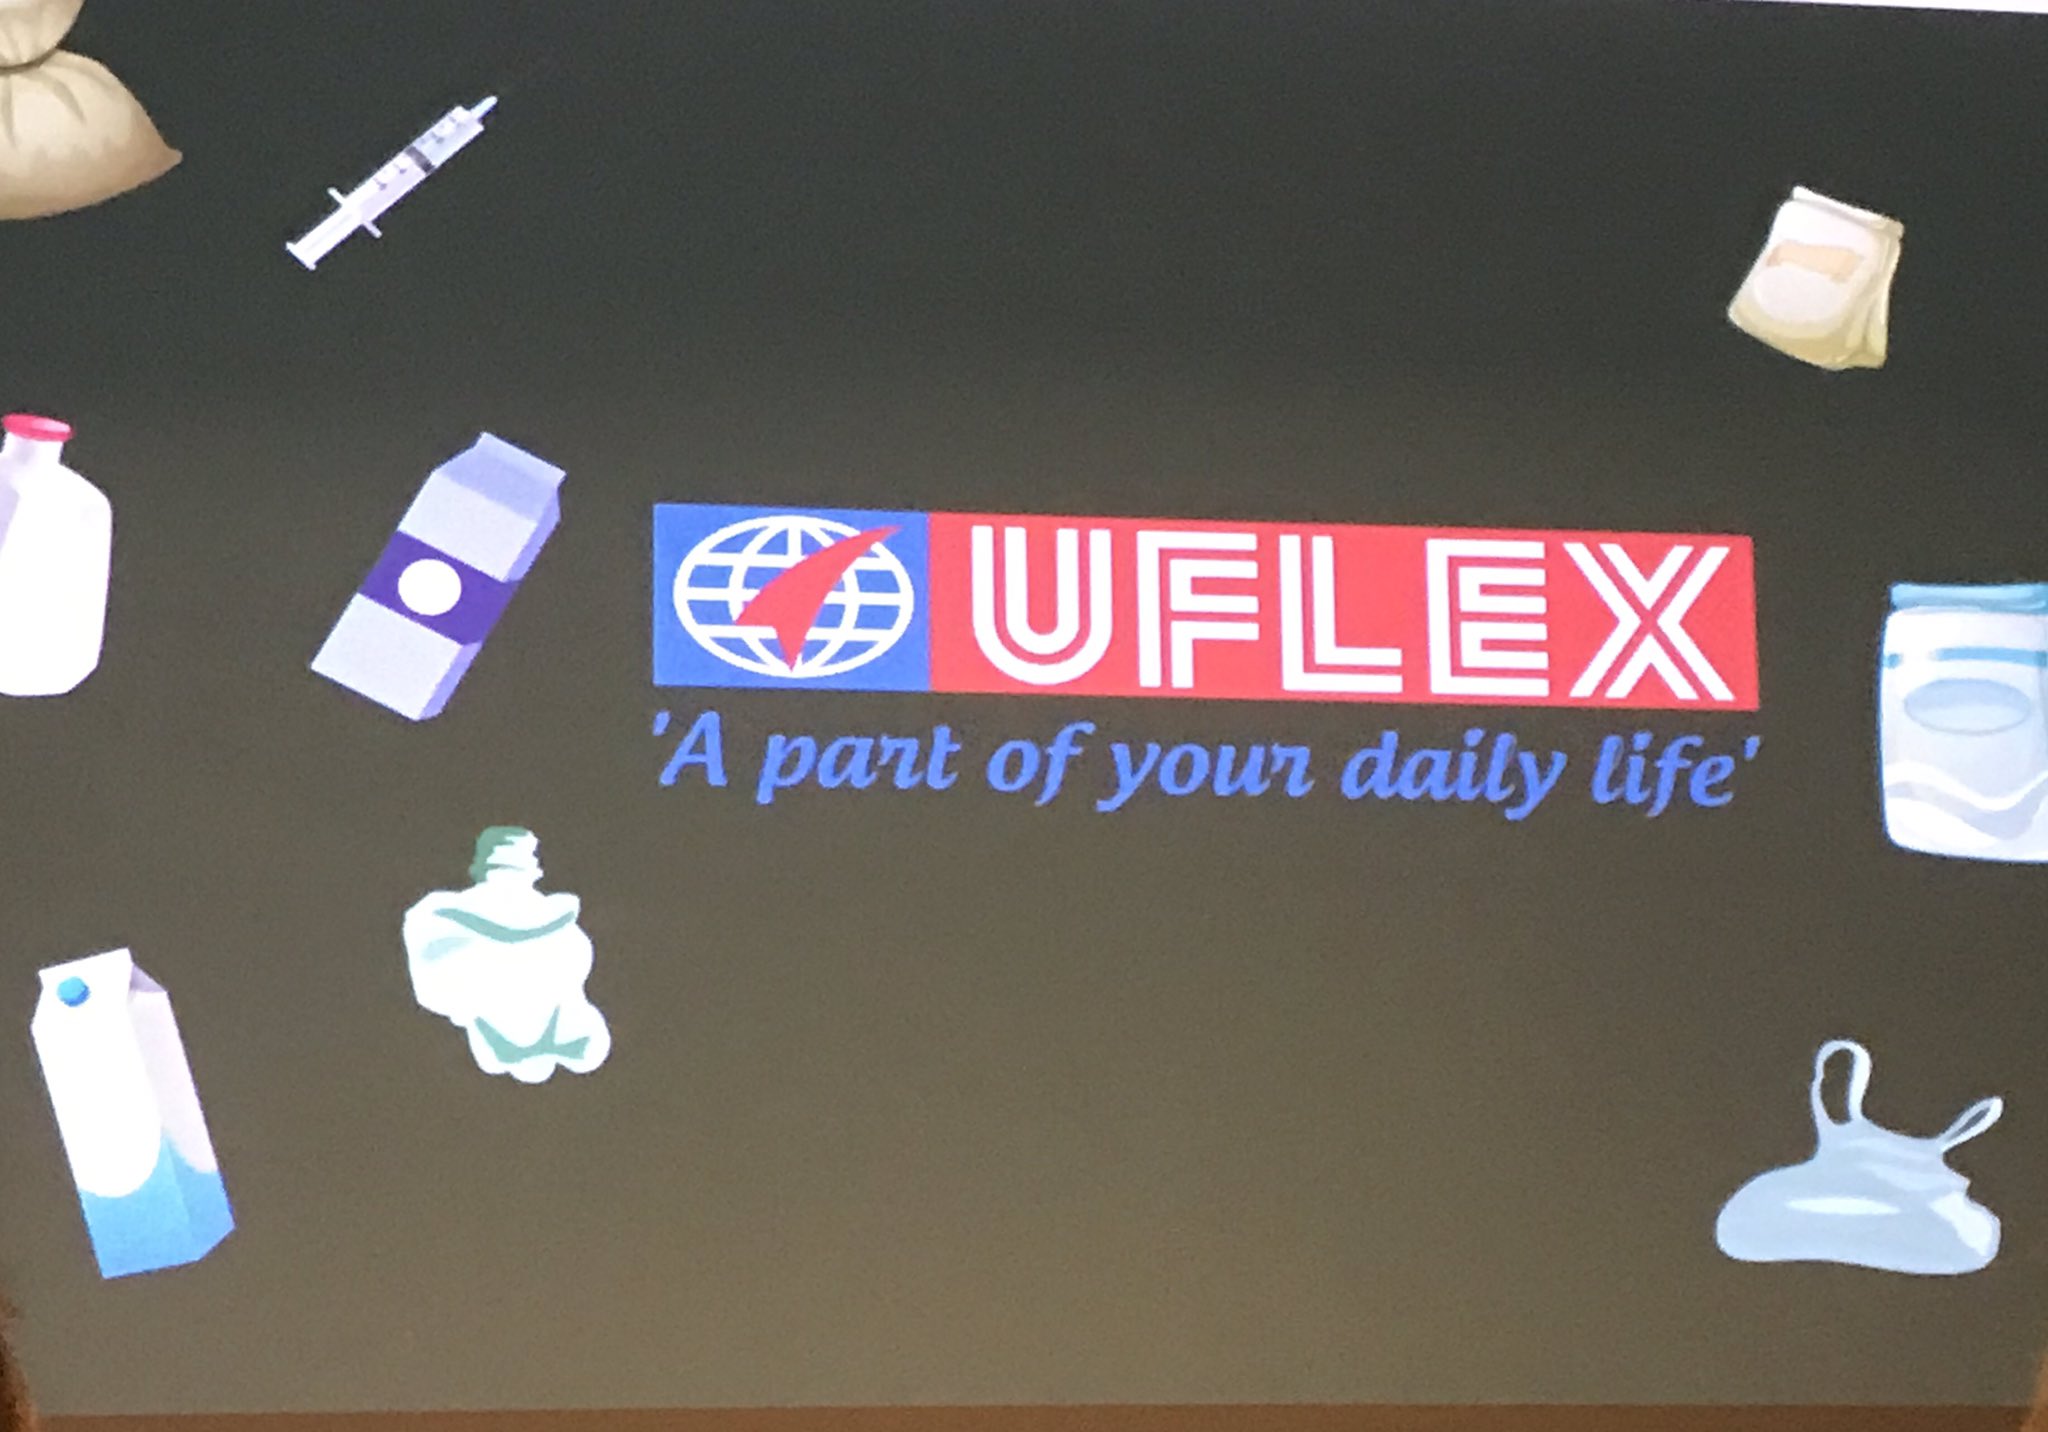 Uflex Q1 up 34.5% to Rs 264.3 cr